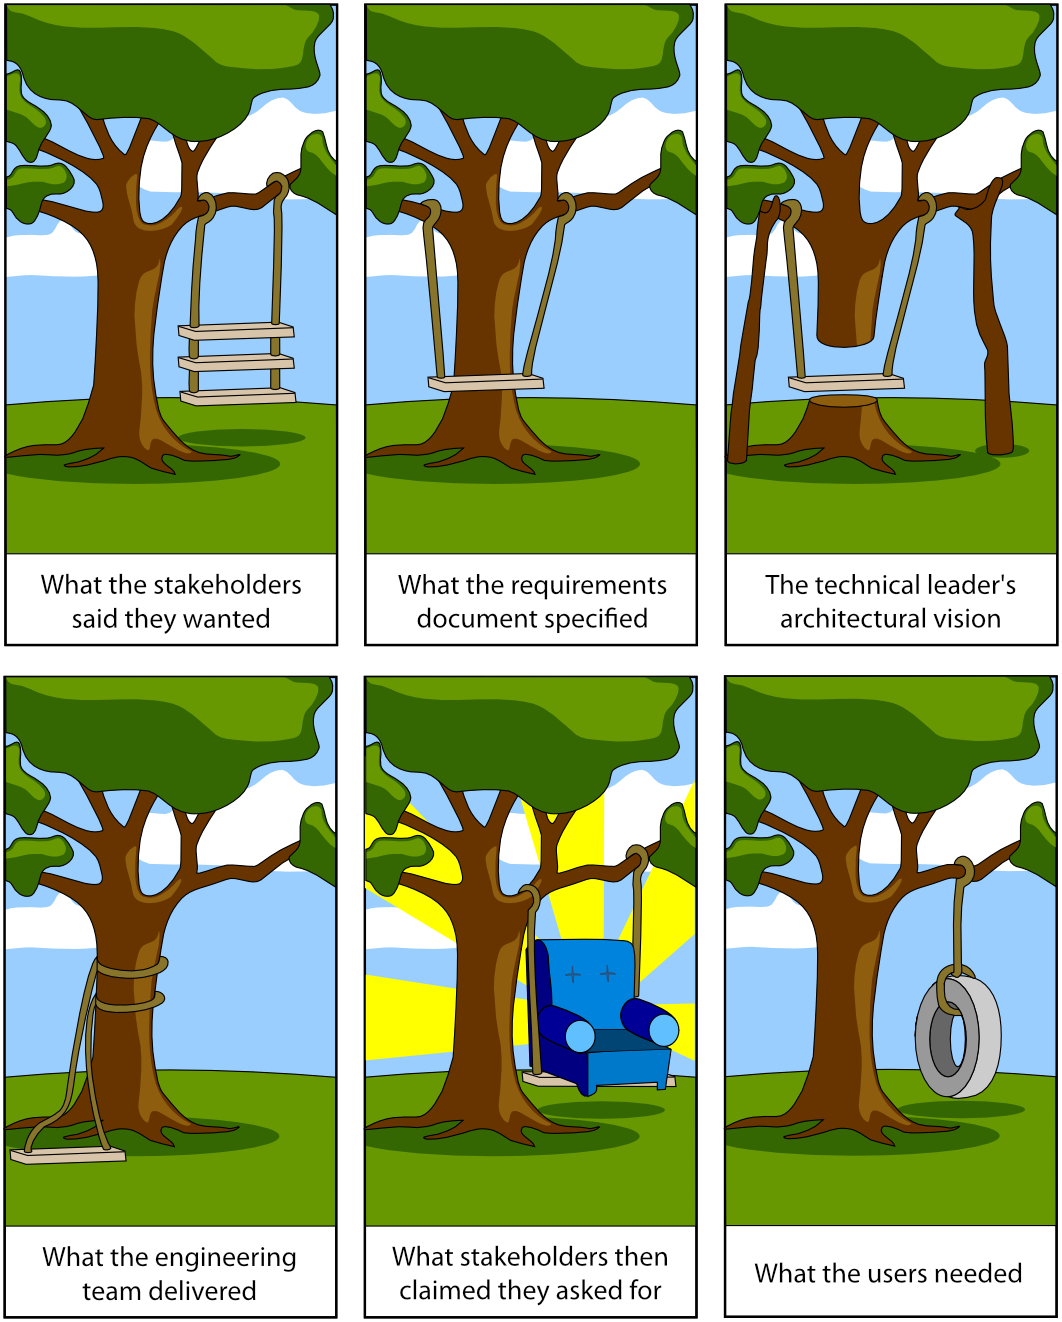 A version of the classic "tree swing cartoon," illustrating misunderstandings in six phases of the software development process.